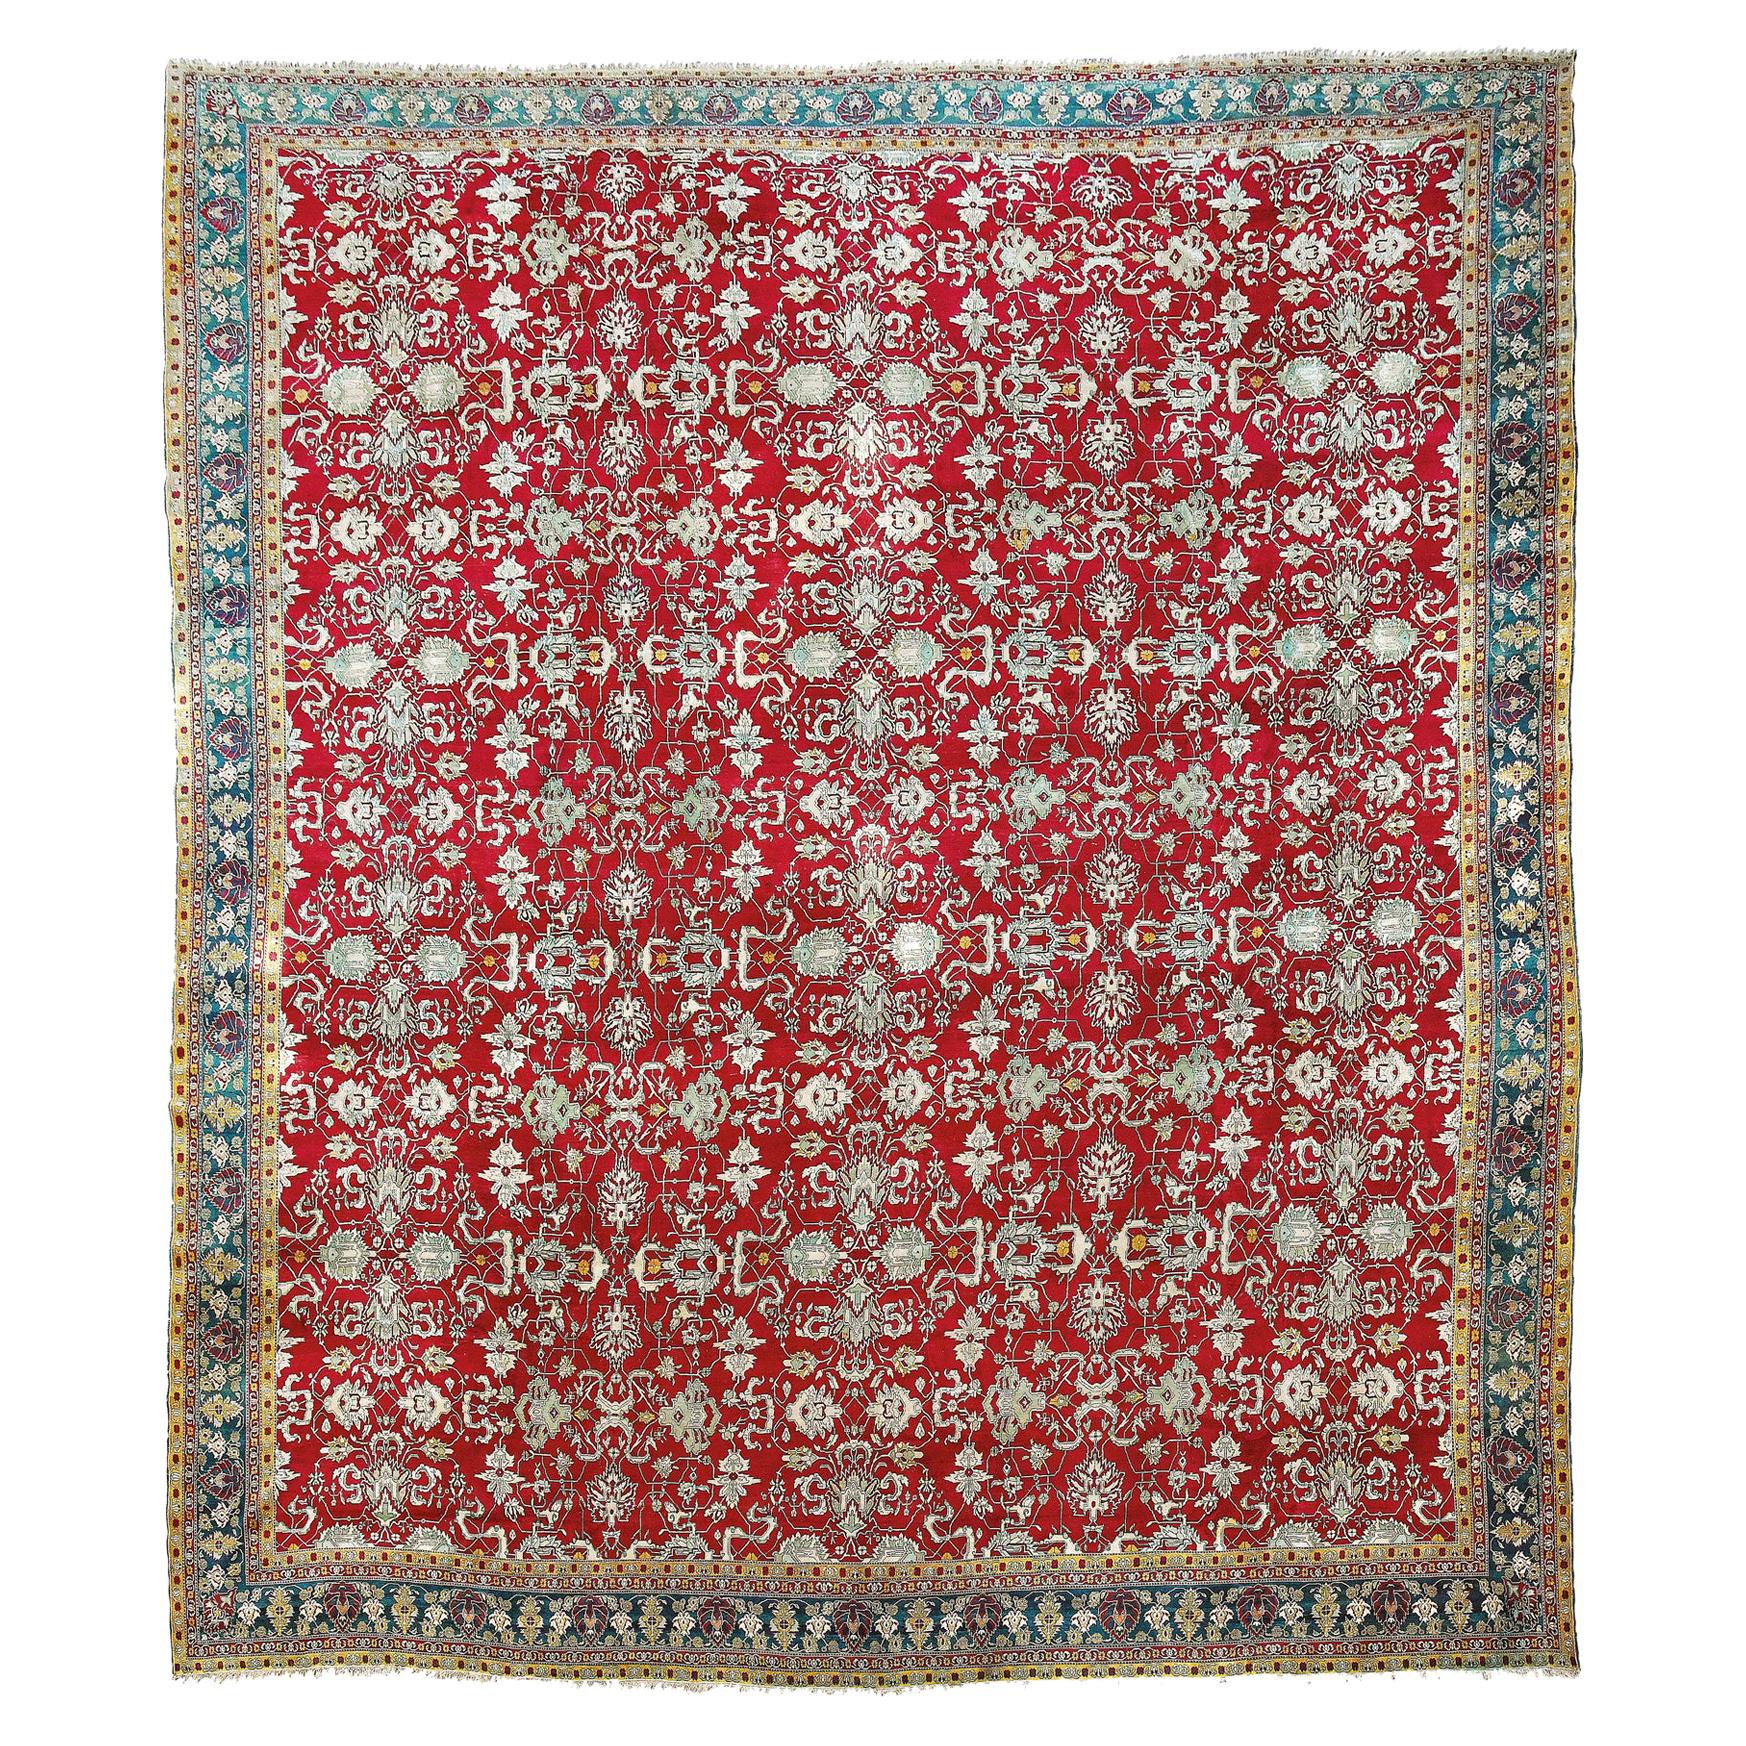 Oversized Indian Red & Green Wool Agra Palace Carpet, 19th Century For Sale